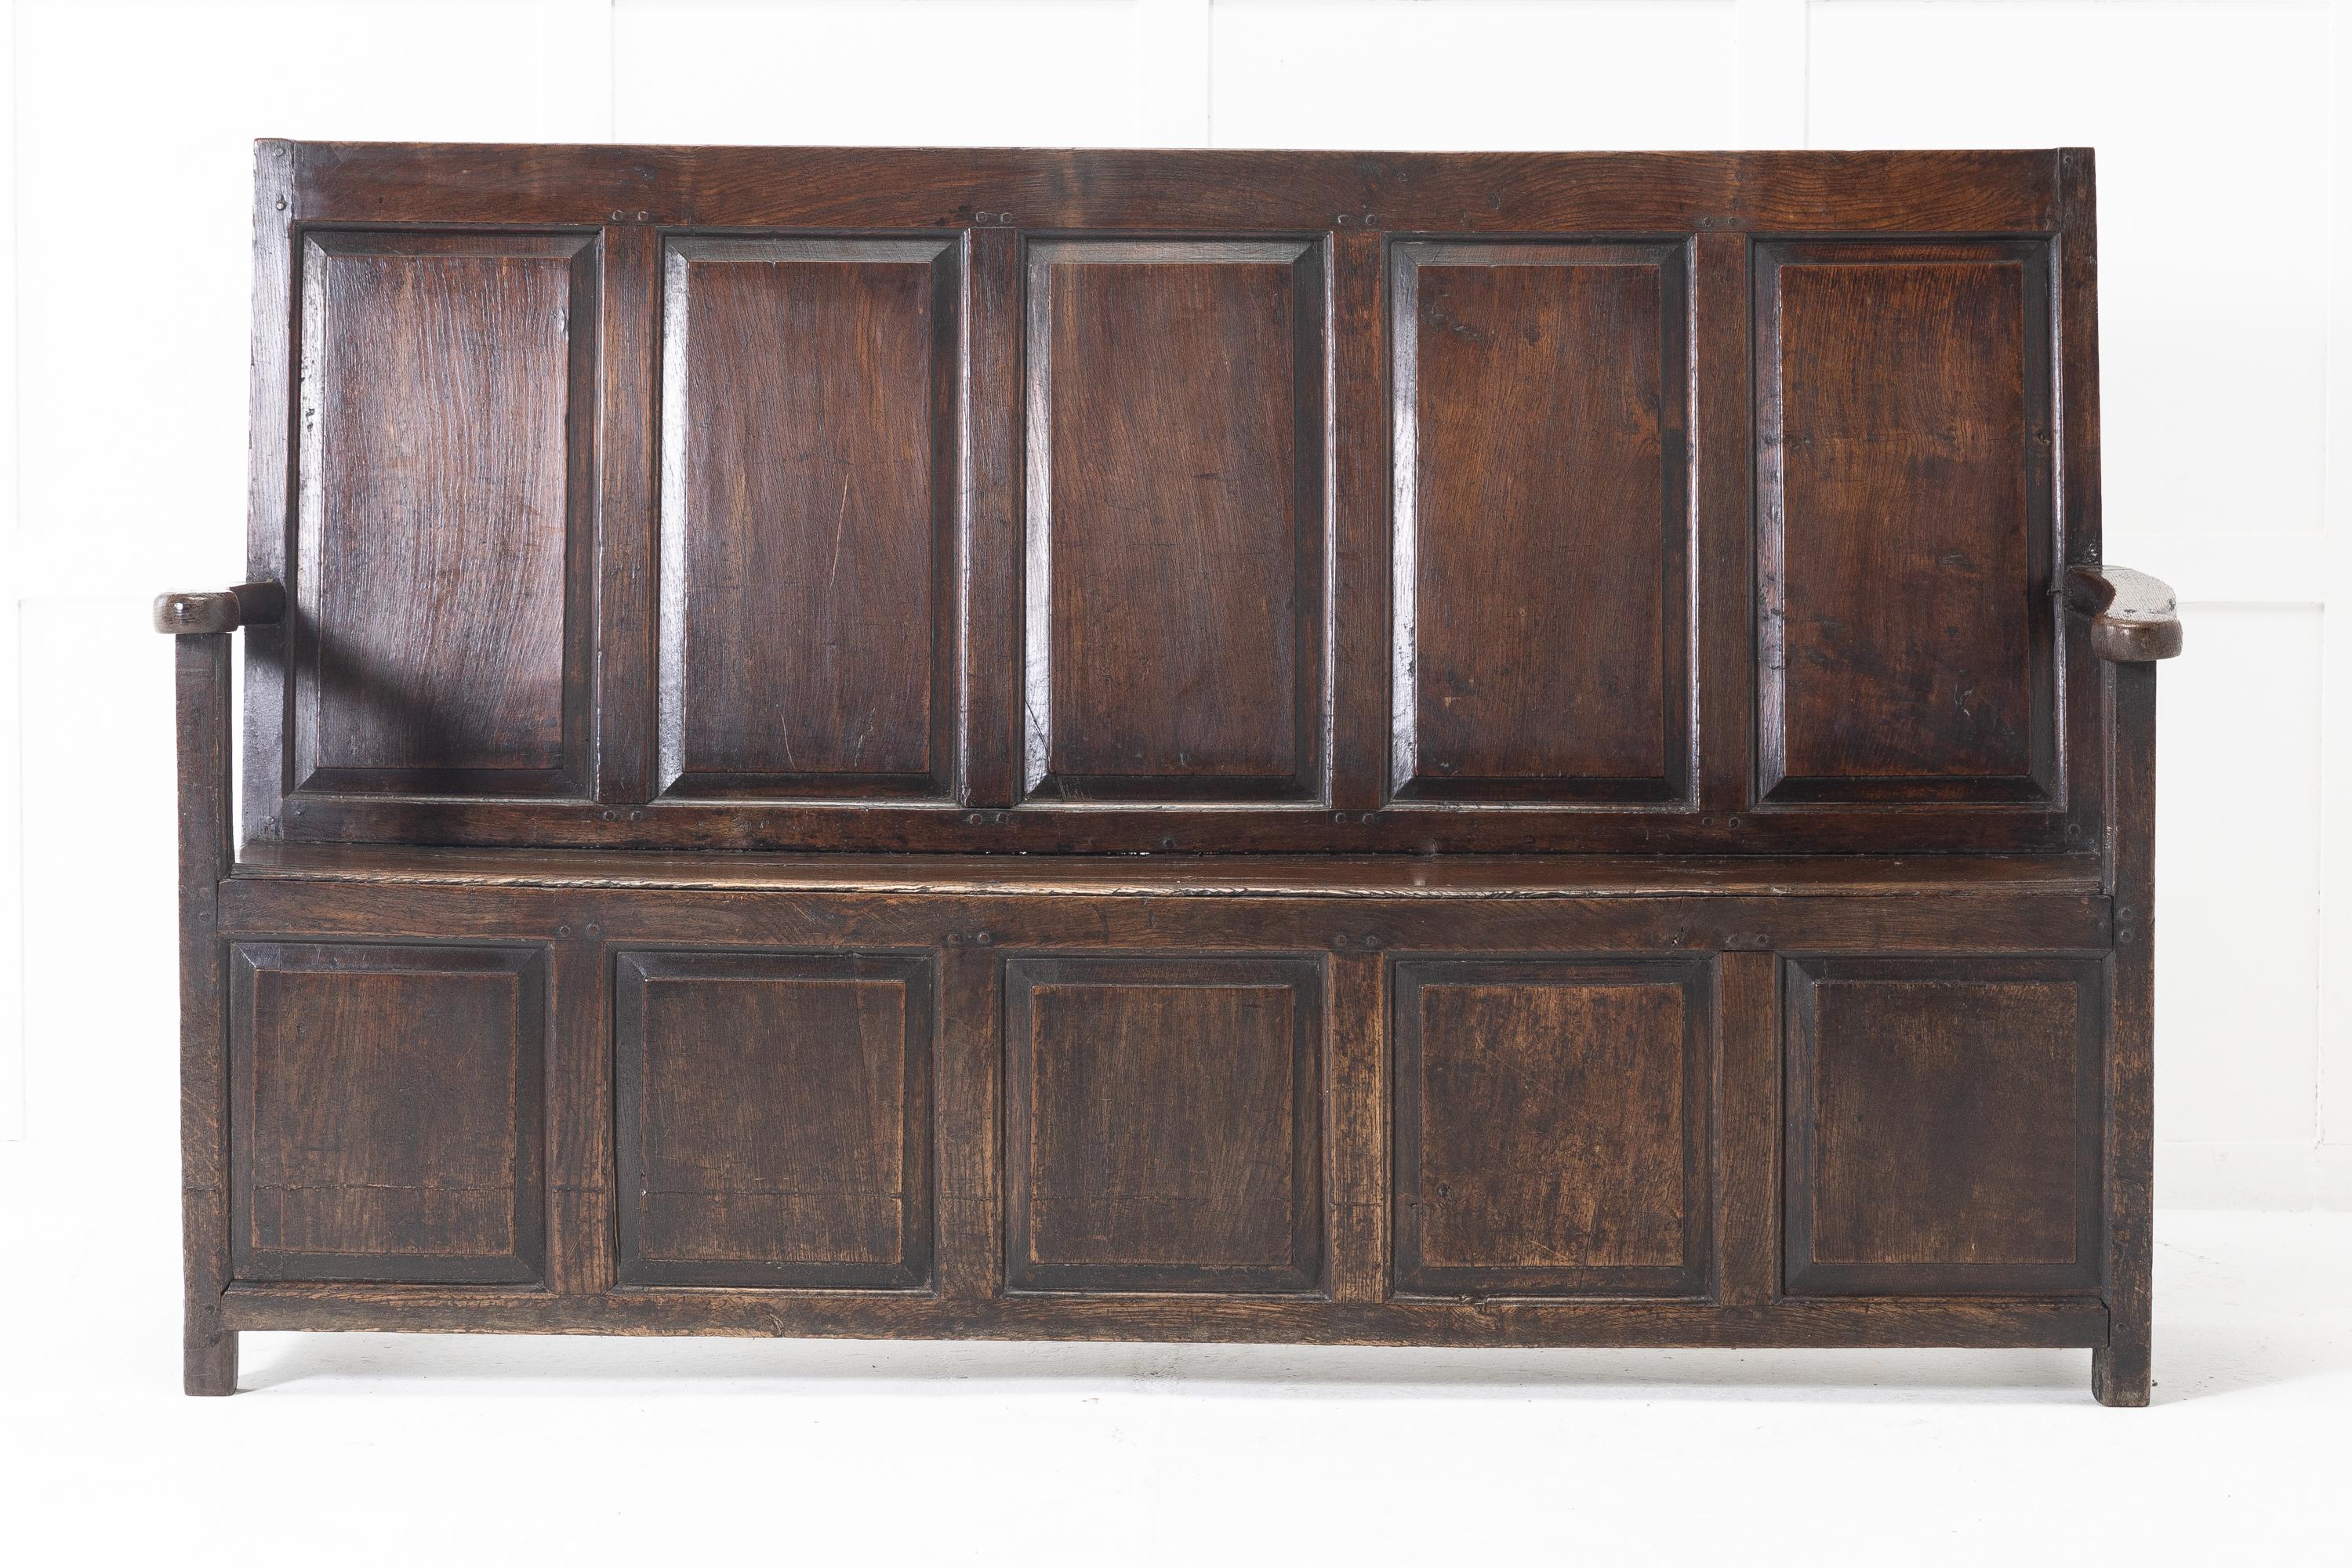 18th century English oak settle with a high back. Unusual format of five fielded panels at the back mirrored on the font panel, and having open arms.

Settles were generally placed by the large open fireplaces in country houses and inns. Usually